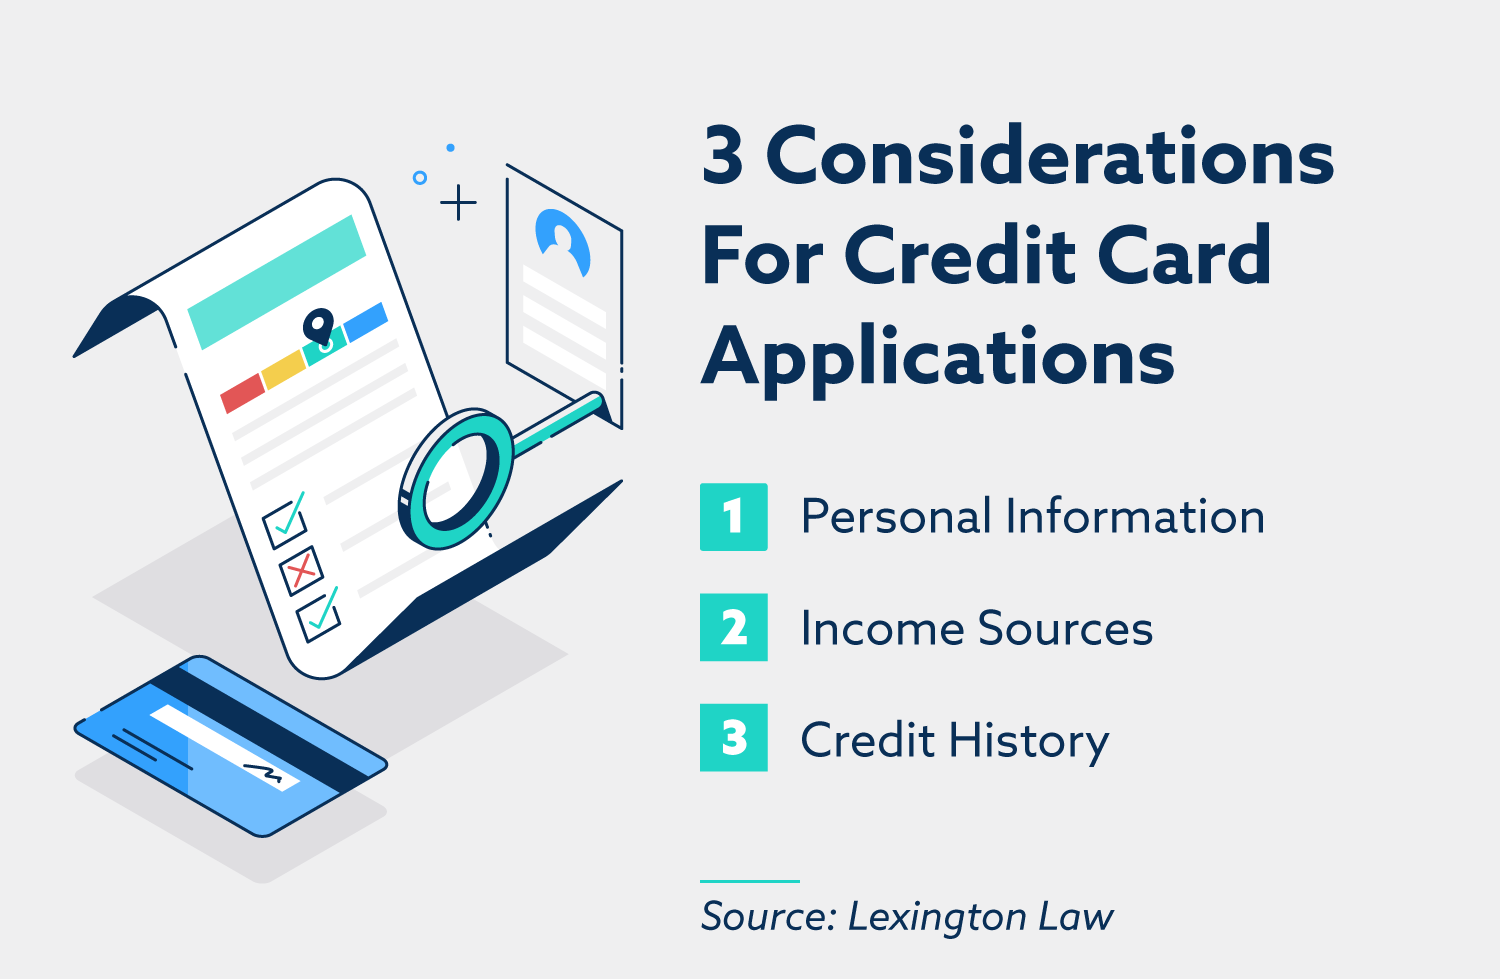 3 considerations for credit card applications